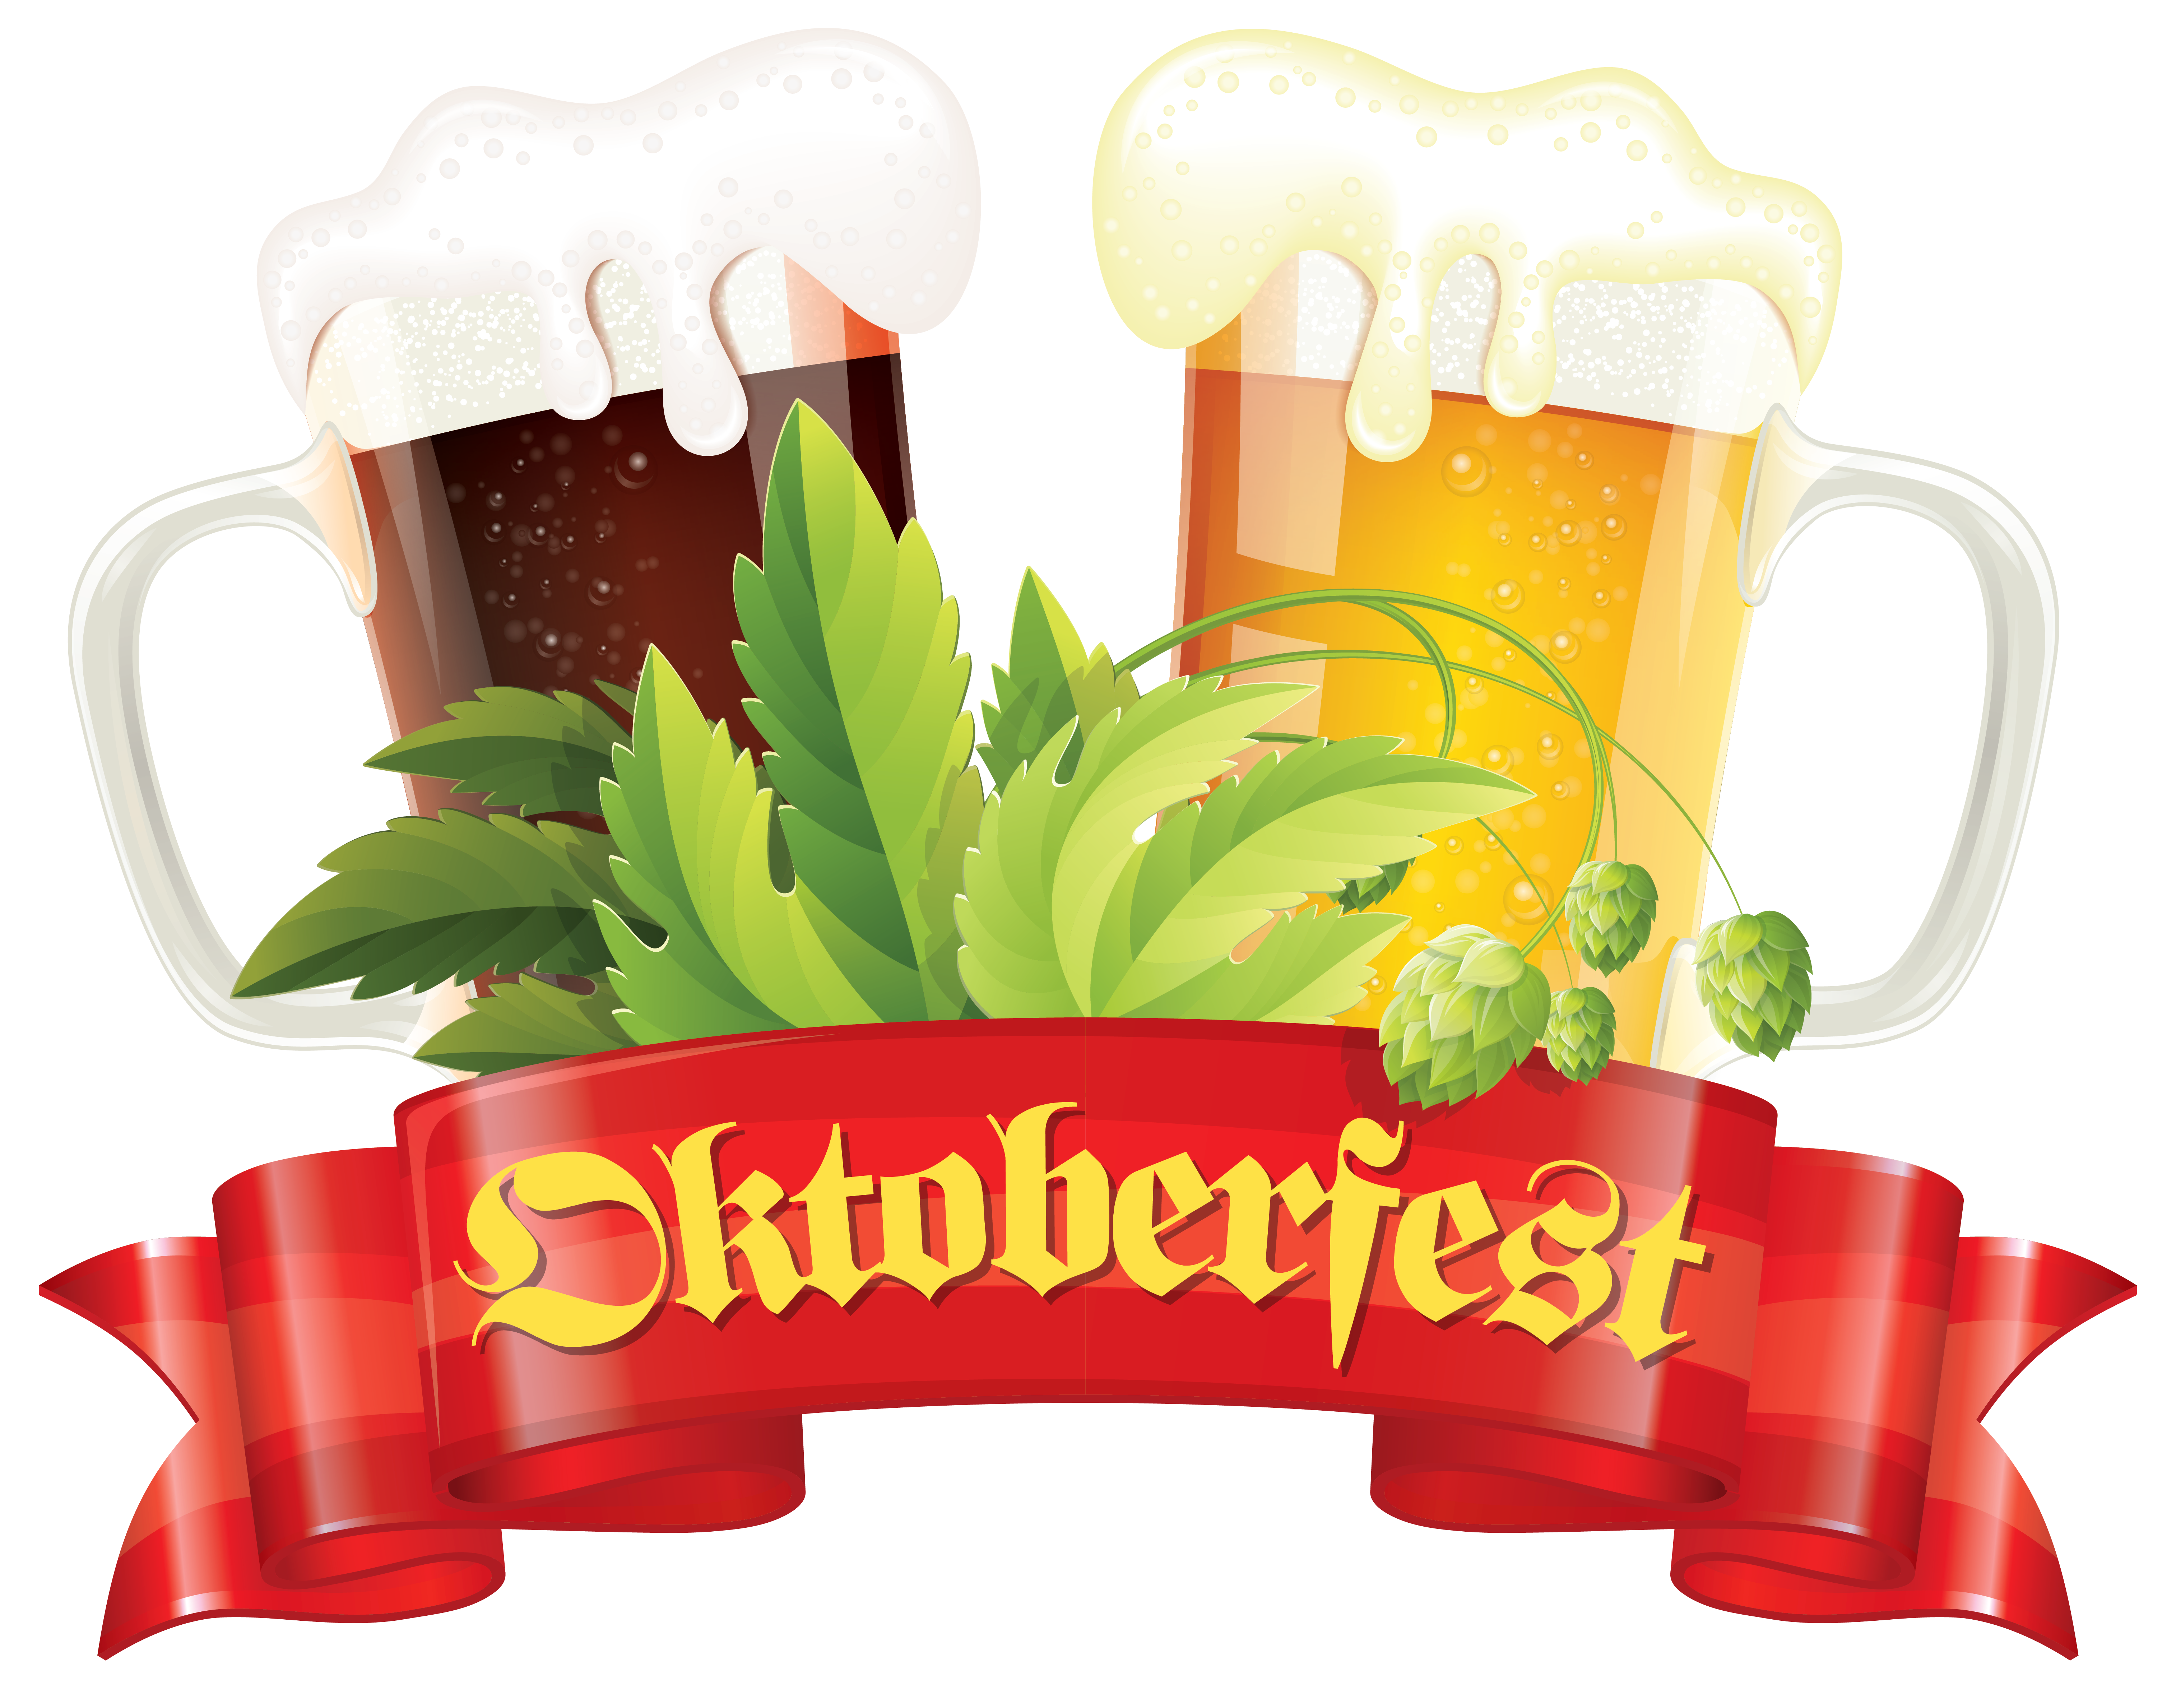 Oktoberfest Red Banner Beers And Malt Png Clipart Picture Images, Photos, Reviews